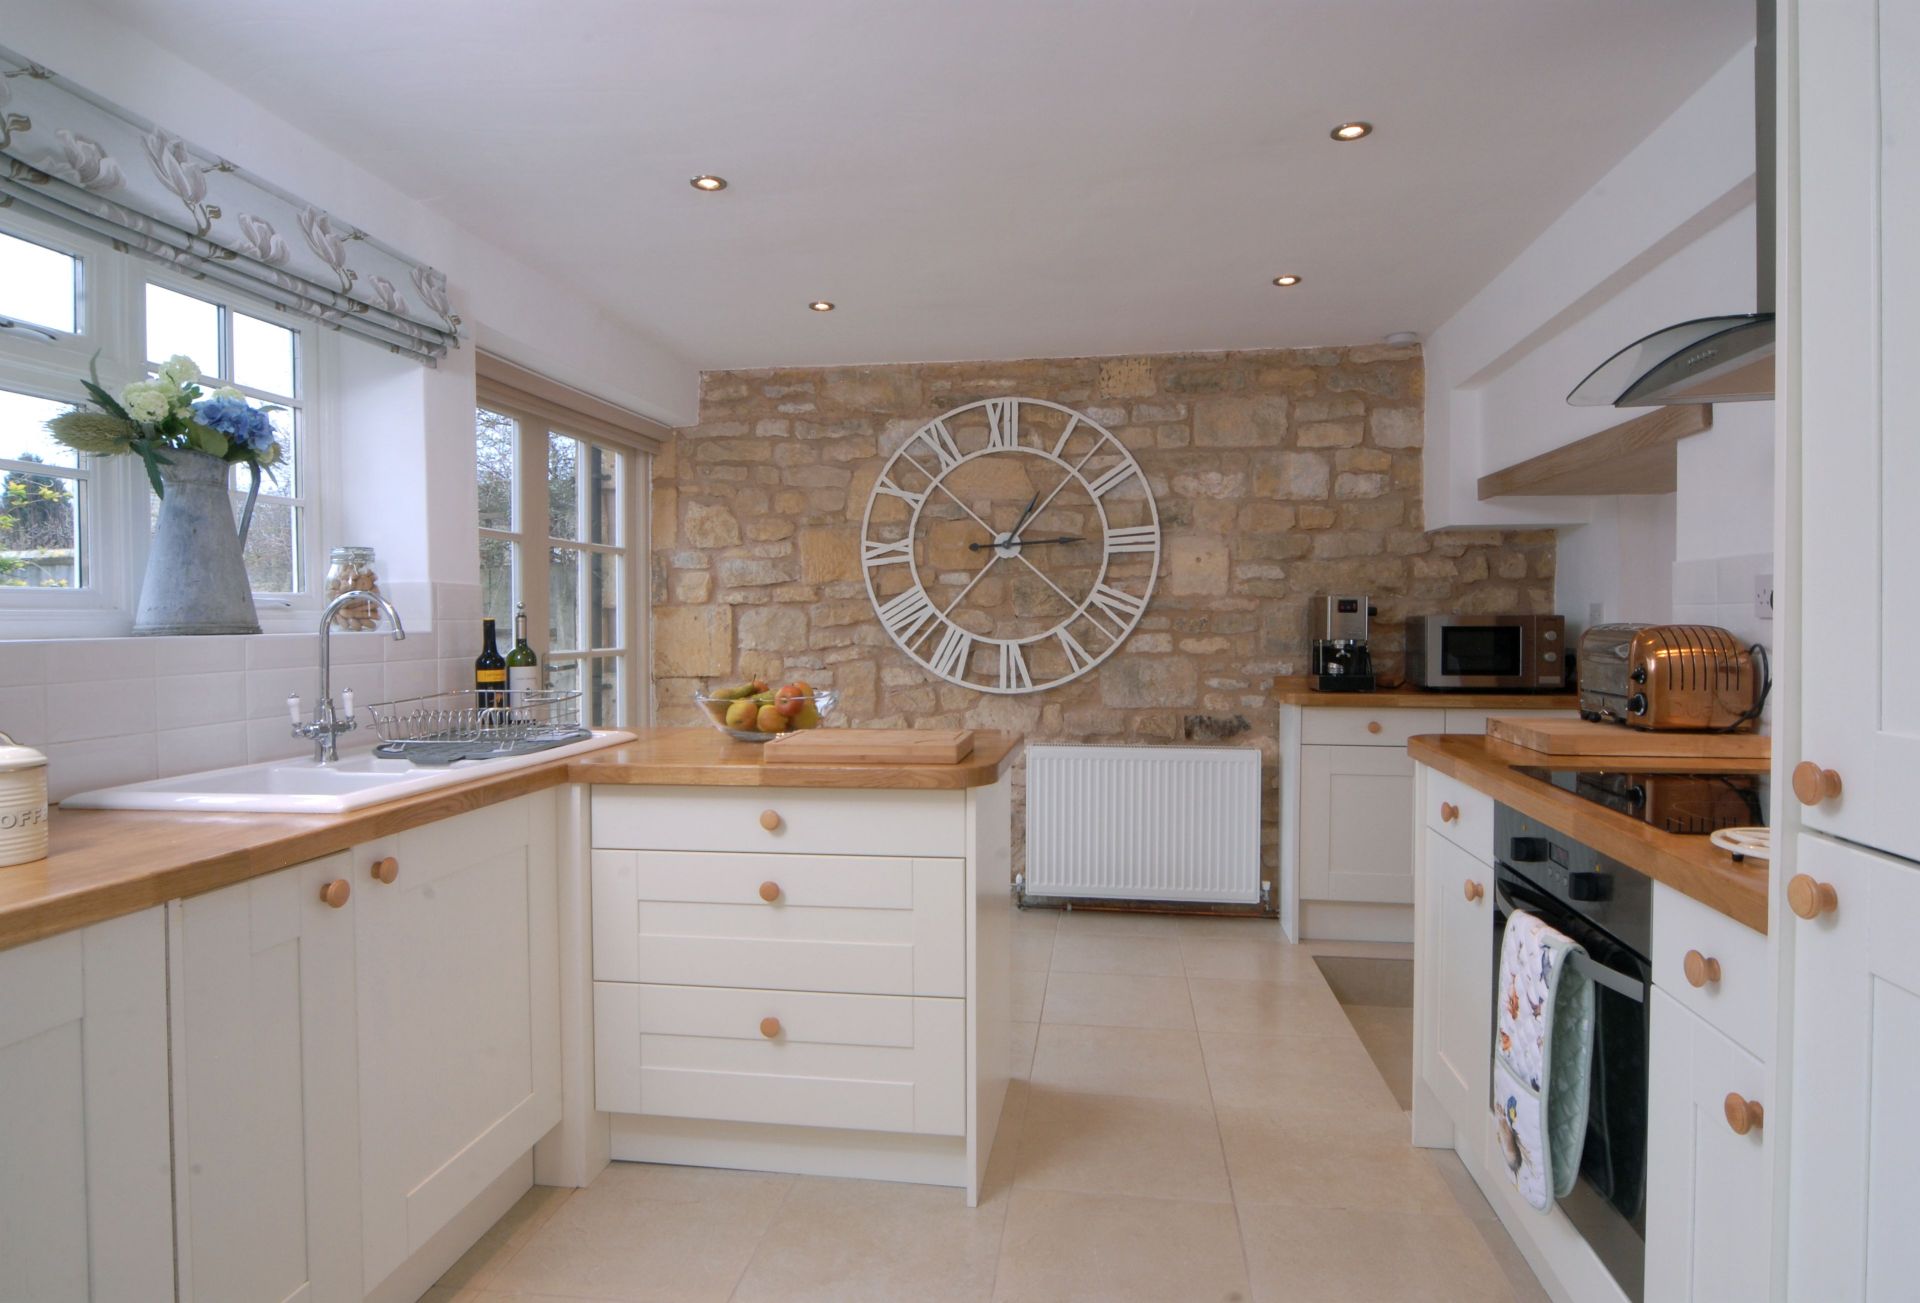 Diamond Cottage is located in Chipping Campden